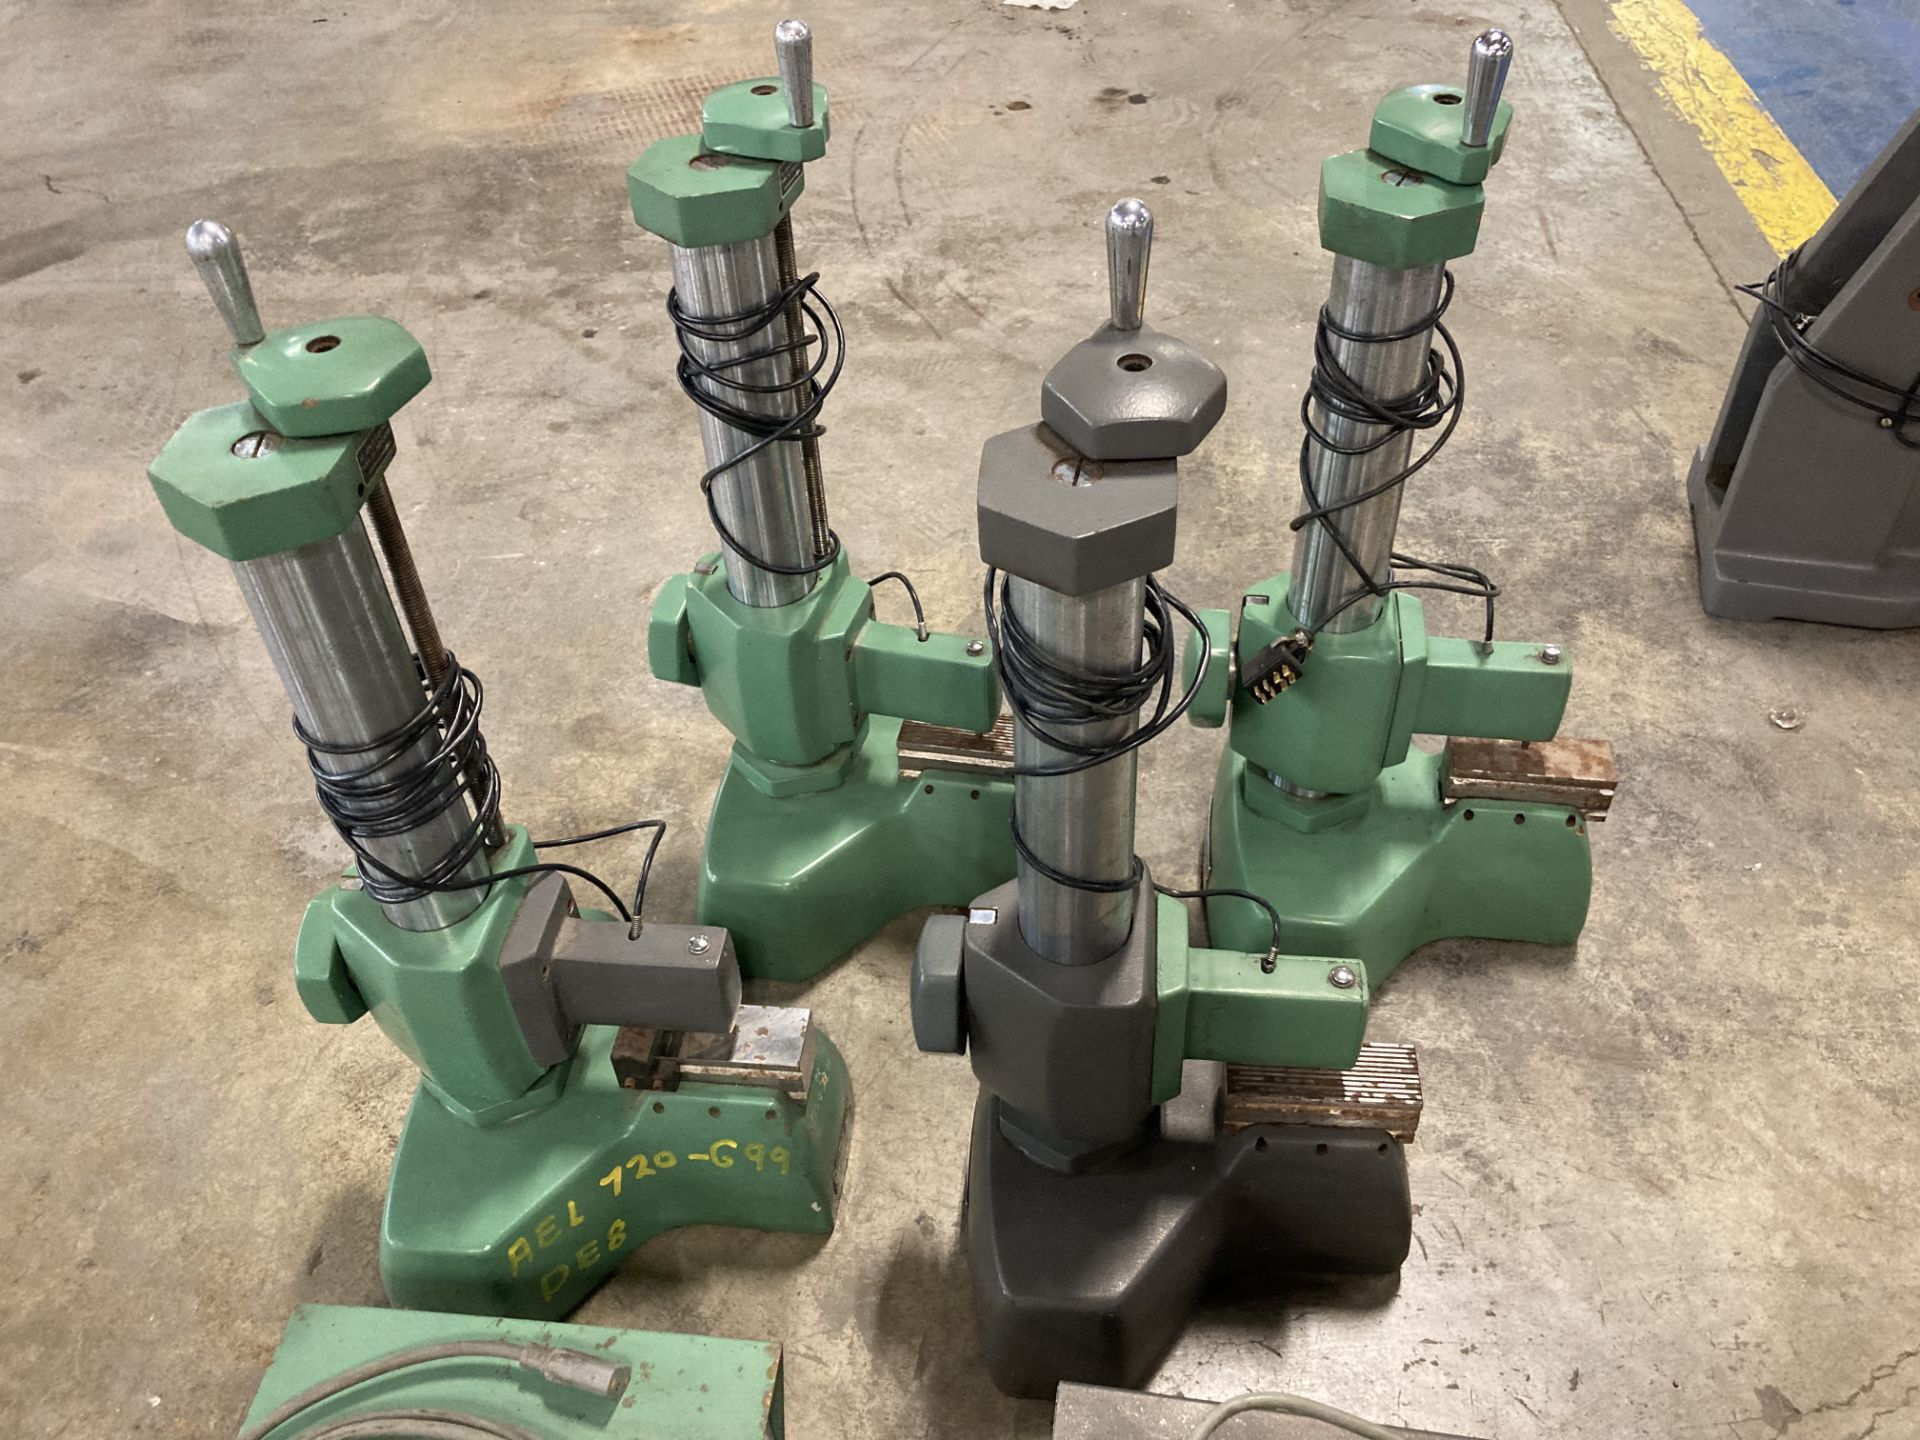 Lot of (5) Federal Gage Block Comparators with Controls - Image 8 of 19